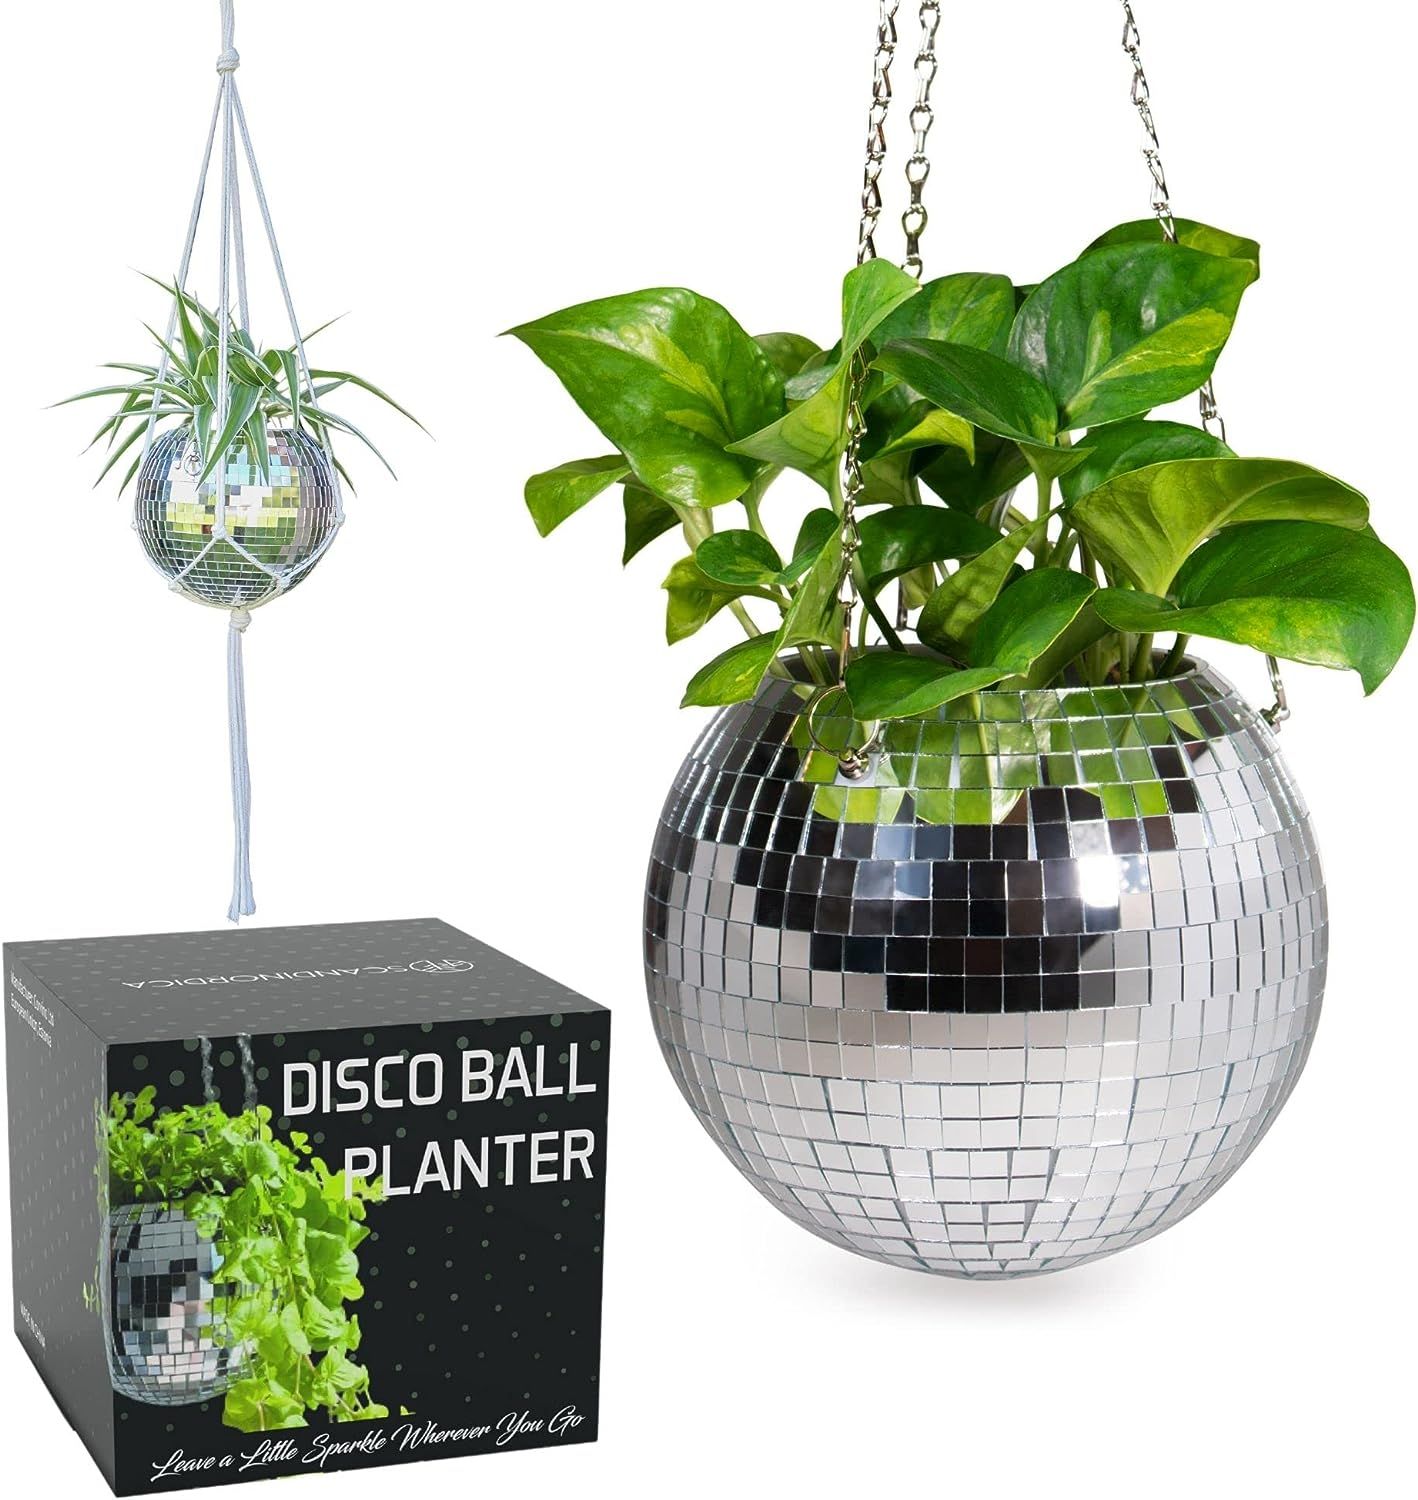 SCANDINORDICA Disco Ball Planter – Value Package: Disco Planter with Chain, Macrame Hanger and ... | Amazon (US)